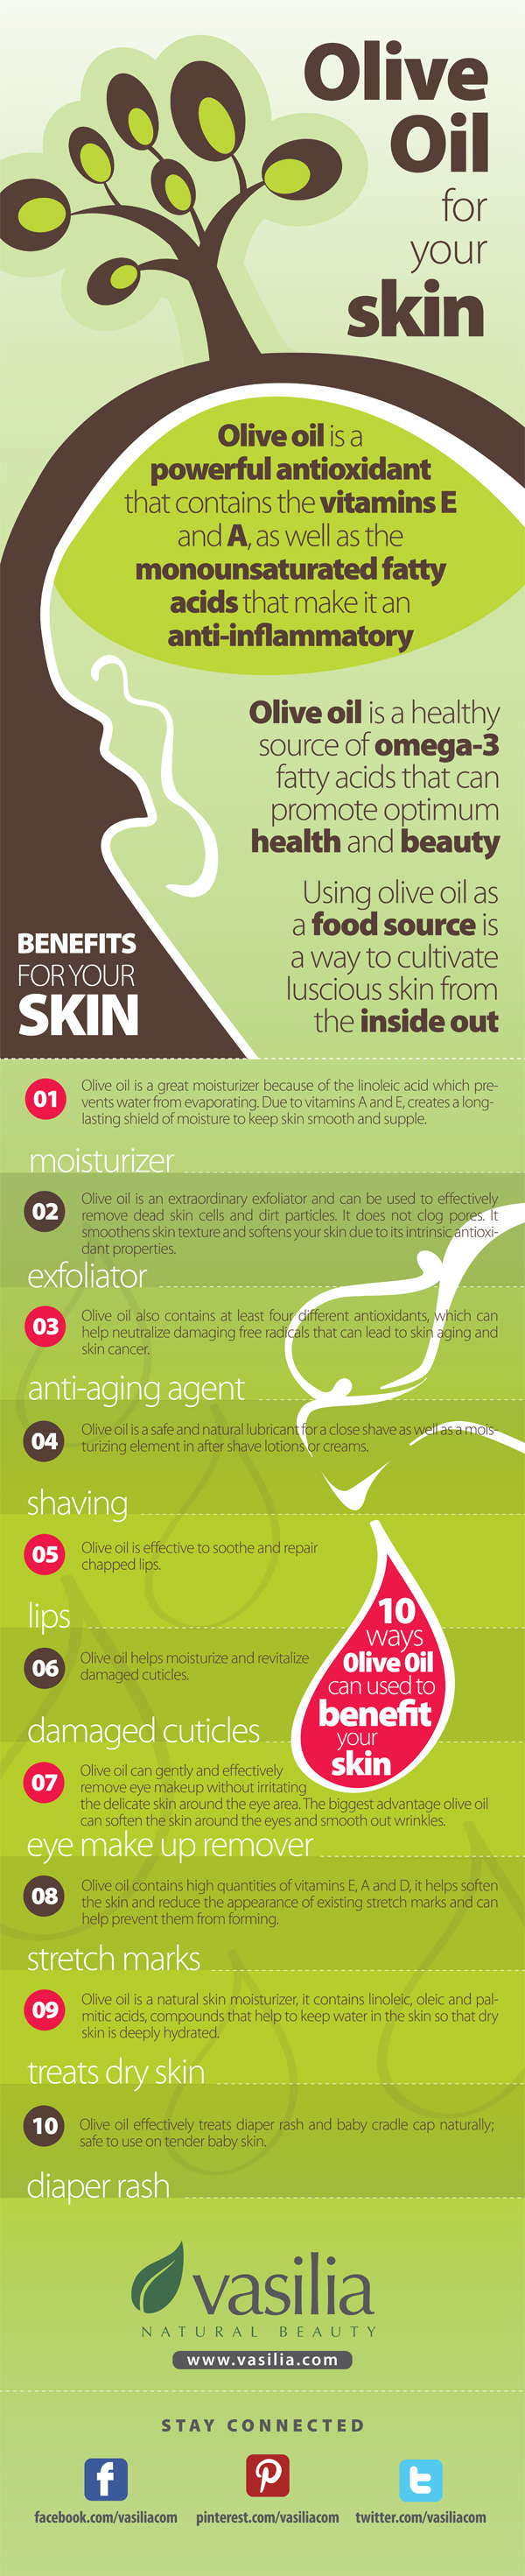 10 Amazing Ways To Use Olive Oil In Skin Care Infographic